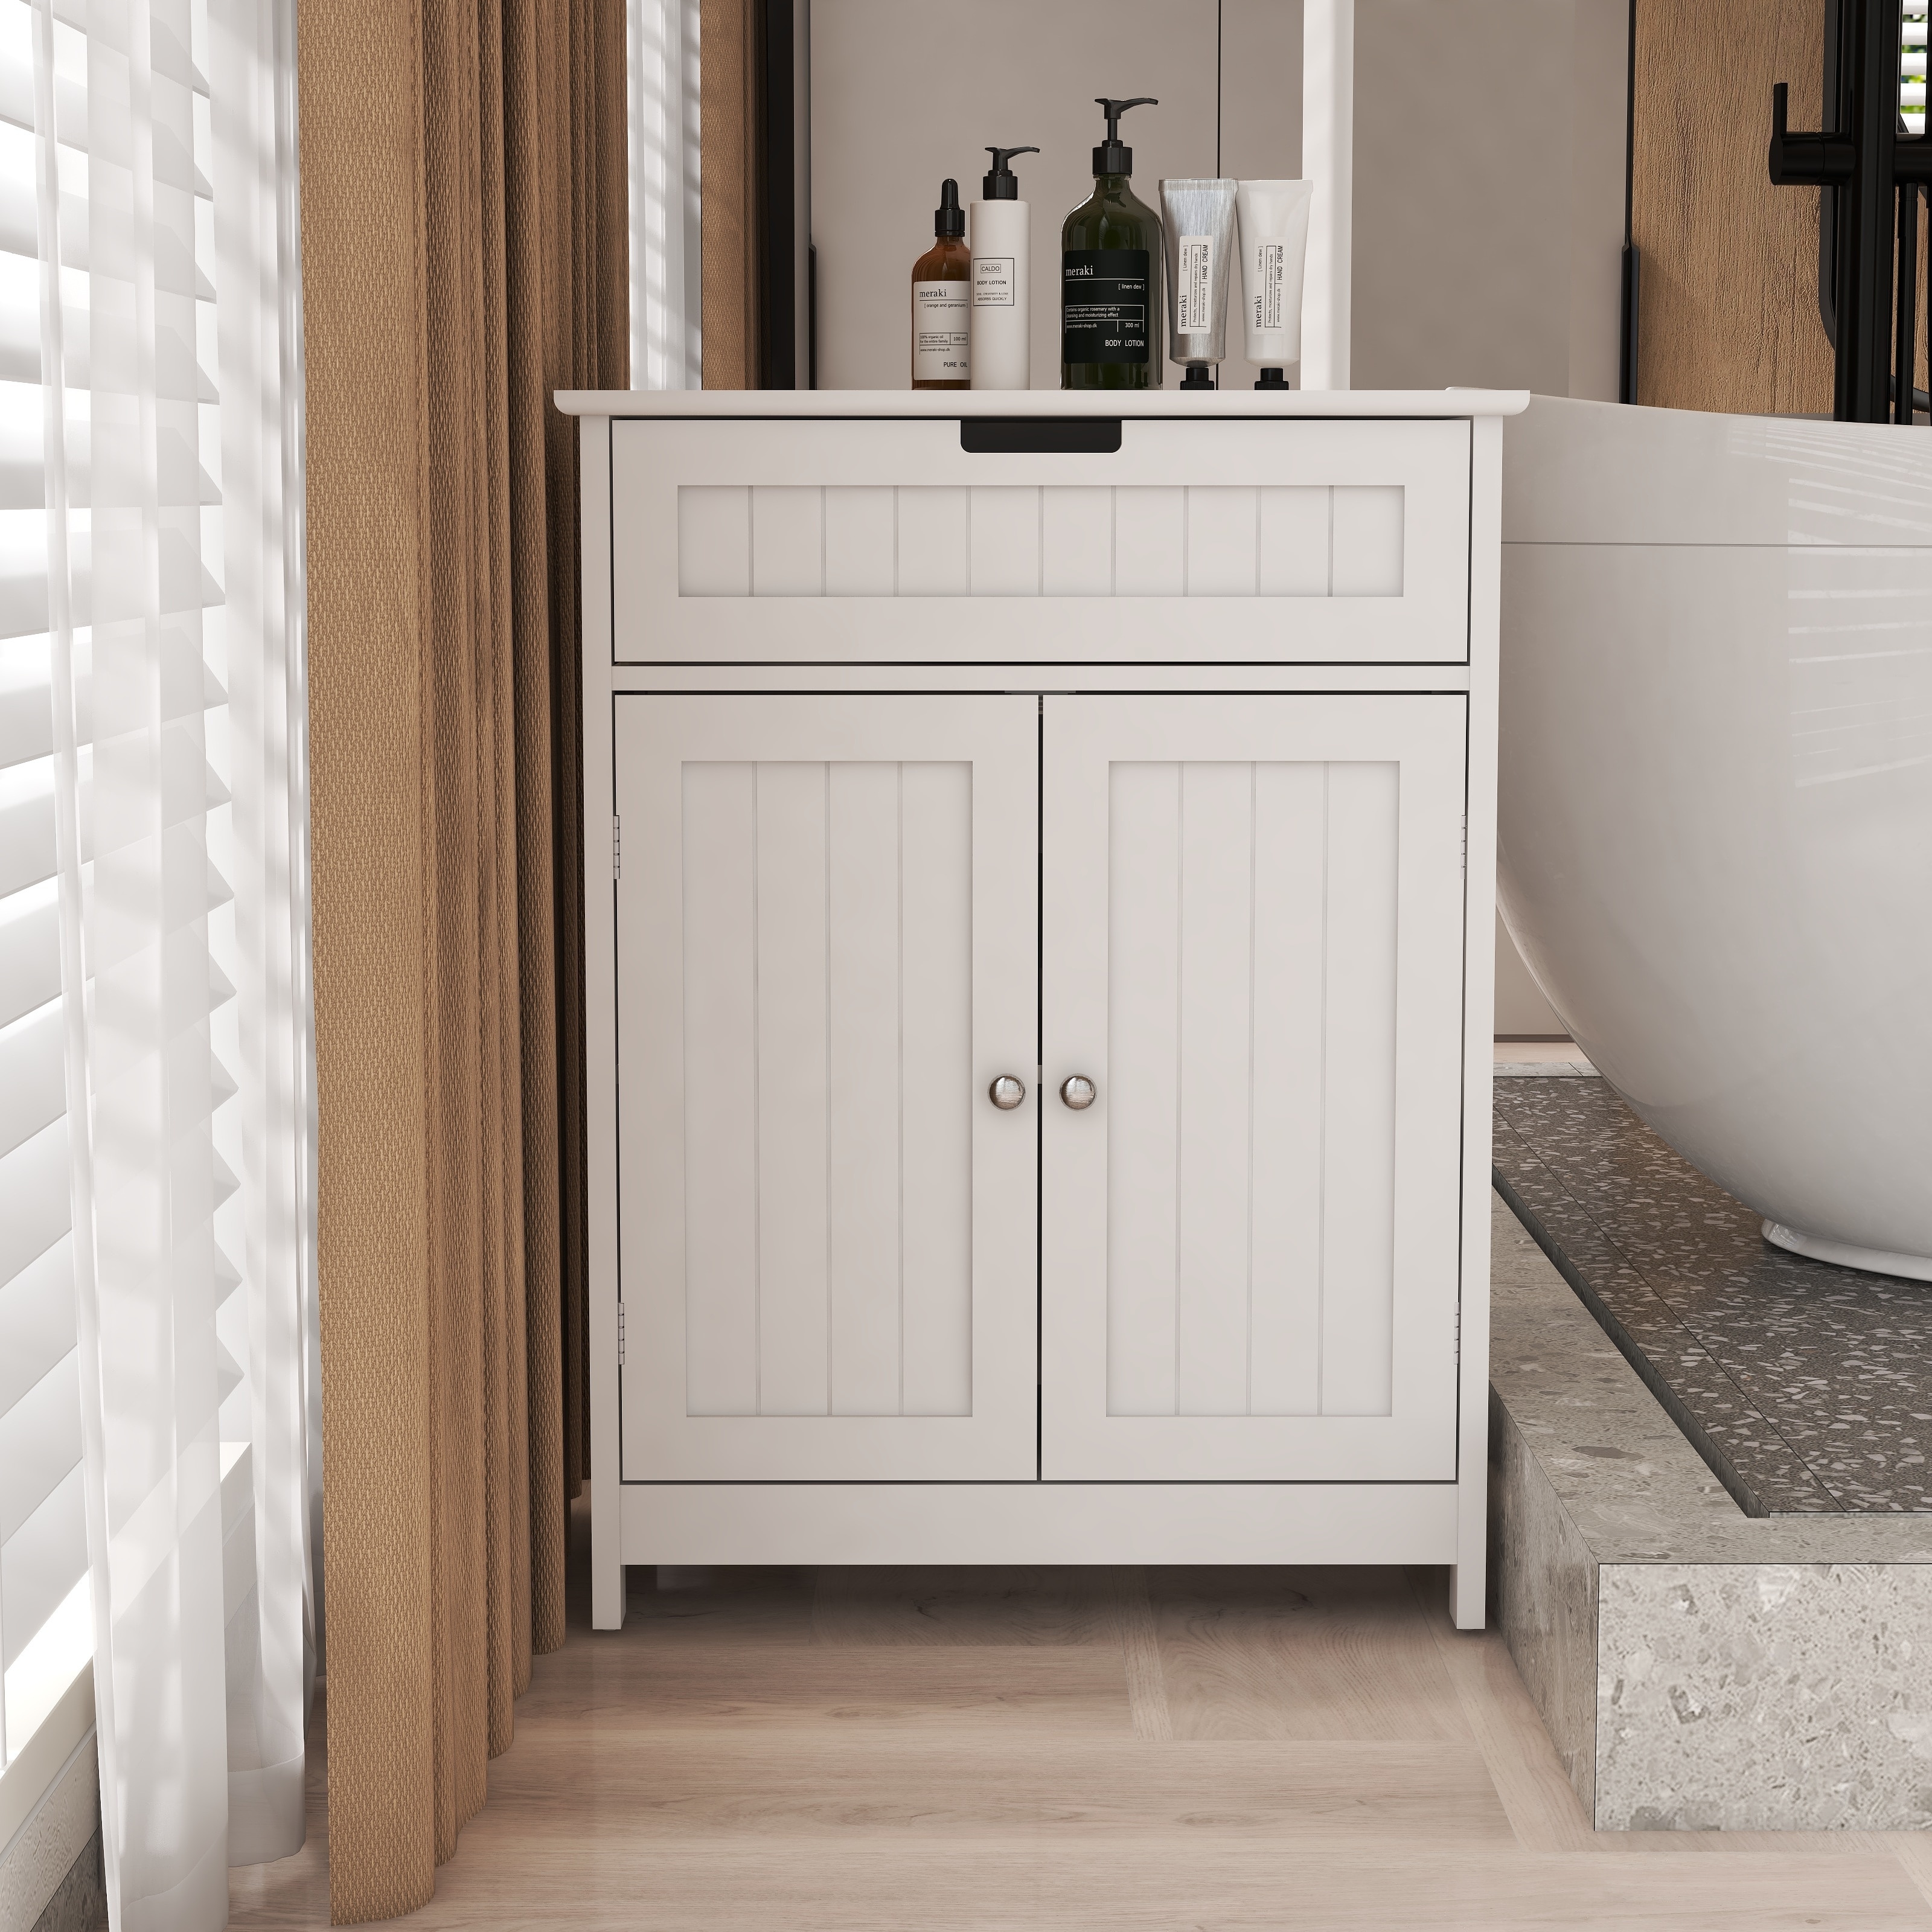 https://ak1.ostkcdn.com/images/products/is/images/direct/90bd21cdadf1aacc28a27004a8aa3ee36771e441/Bathroom-Floor-Cabinet-Freestanding-2-Doors-and-1-Drawer-Wood-Storage-Organizer-Cabinet-for-Bathroom-and-Living-Room-White.jpg